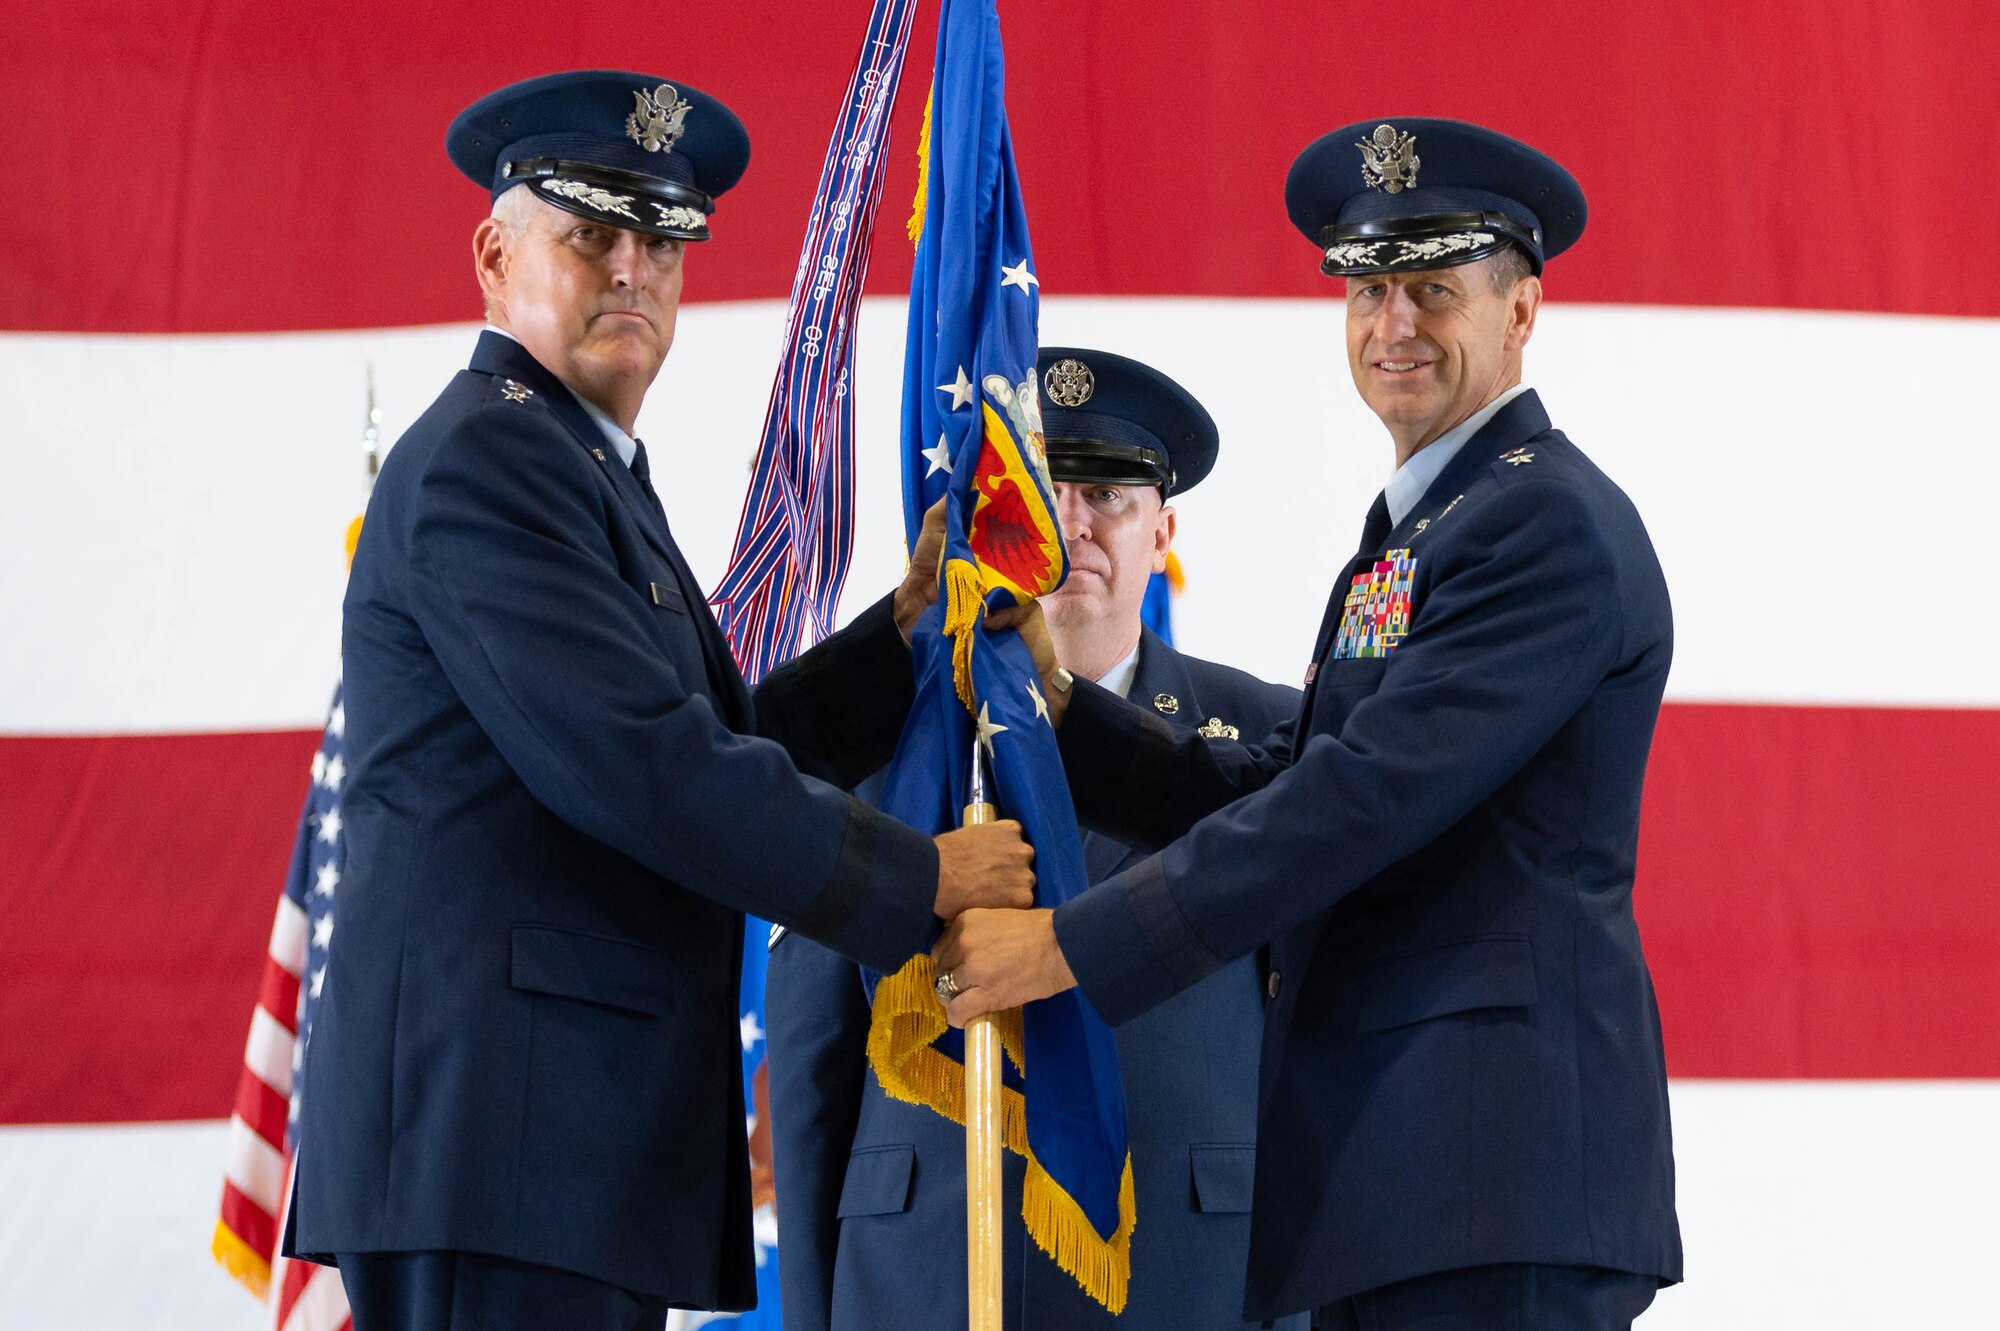 U.S. Air Force Gen. Mike Minihan, Air Mobility Command commander, gives guidon to Maj. Gen. Corey Martin during a change of command ceremony.